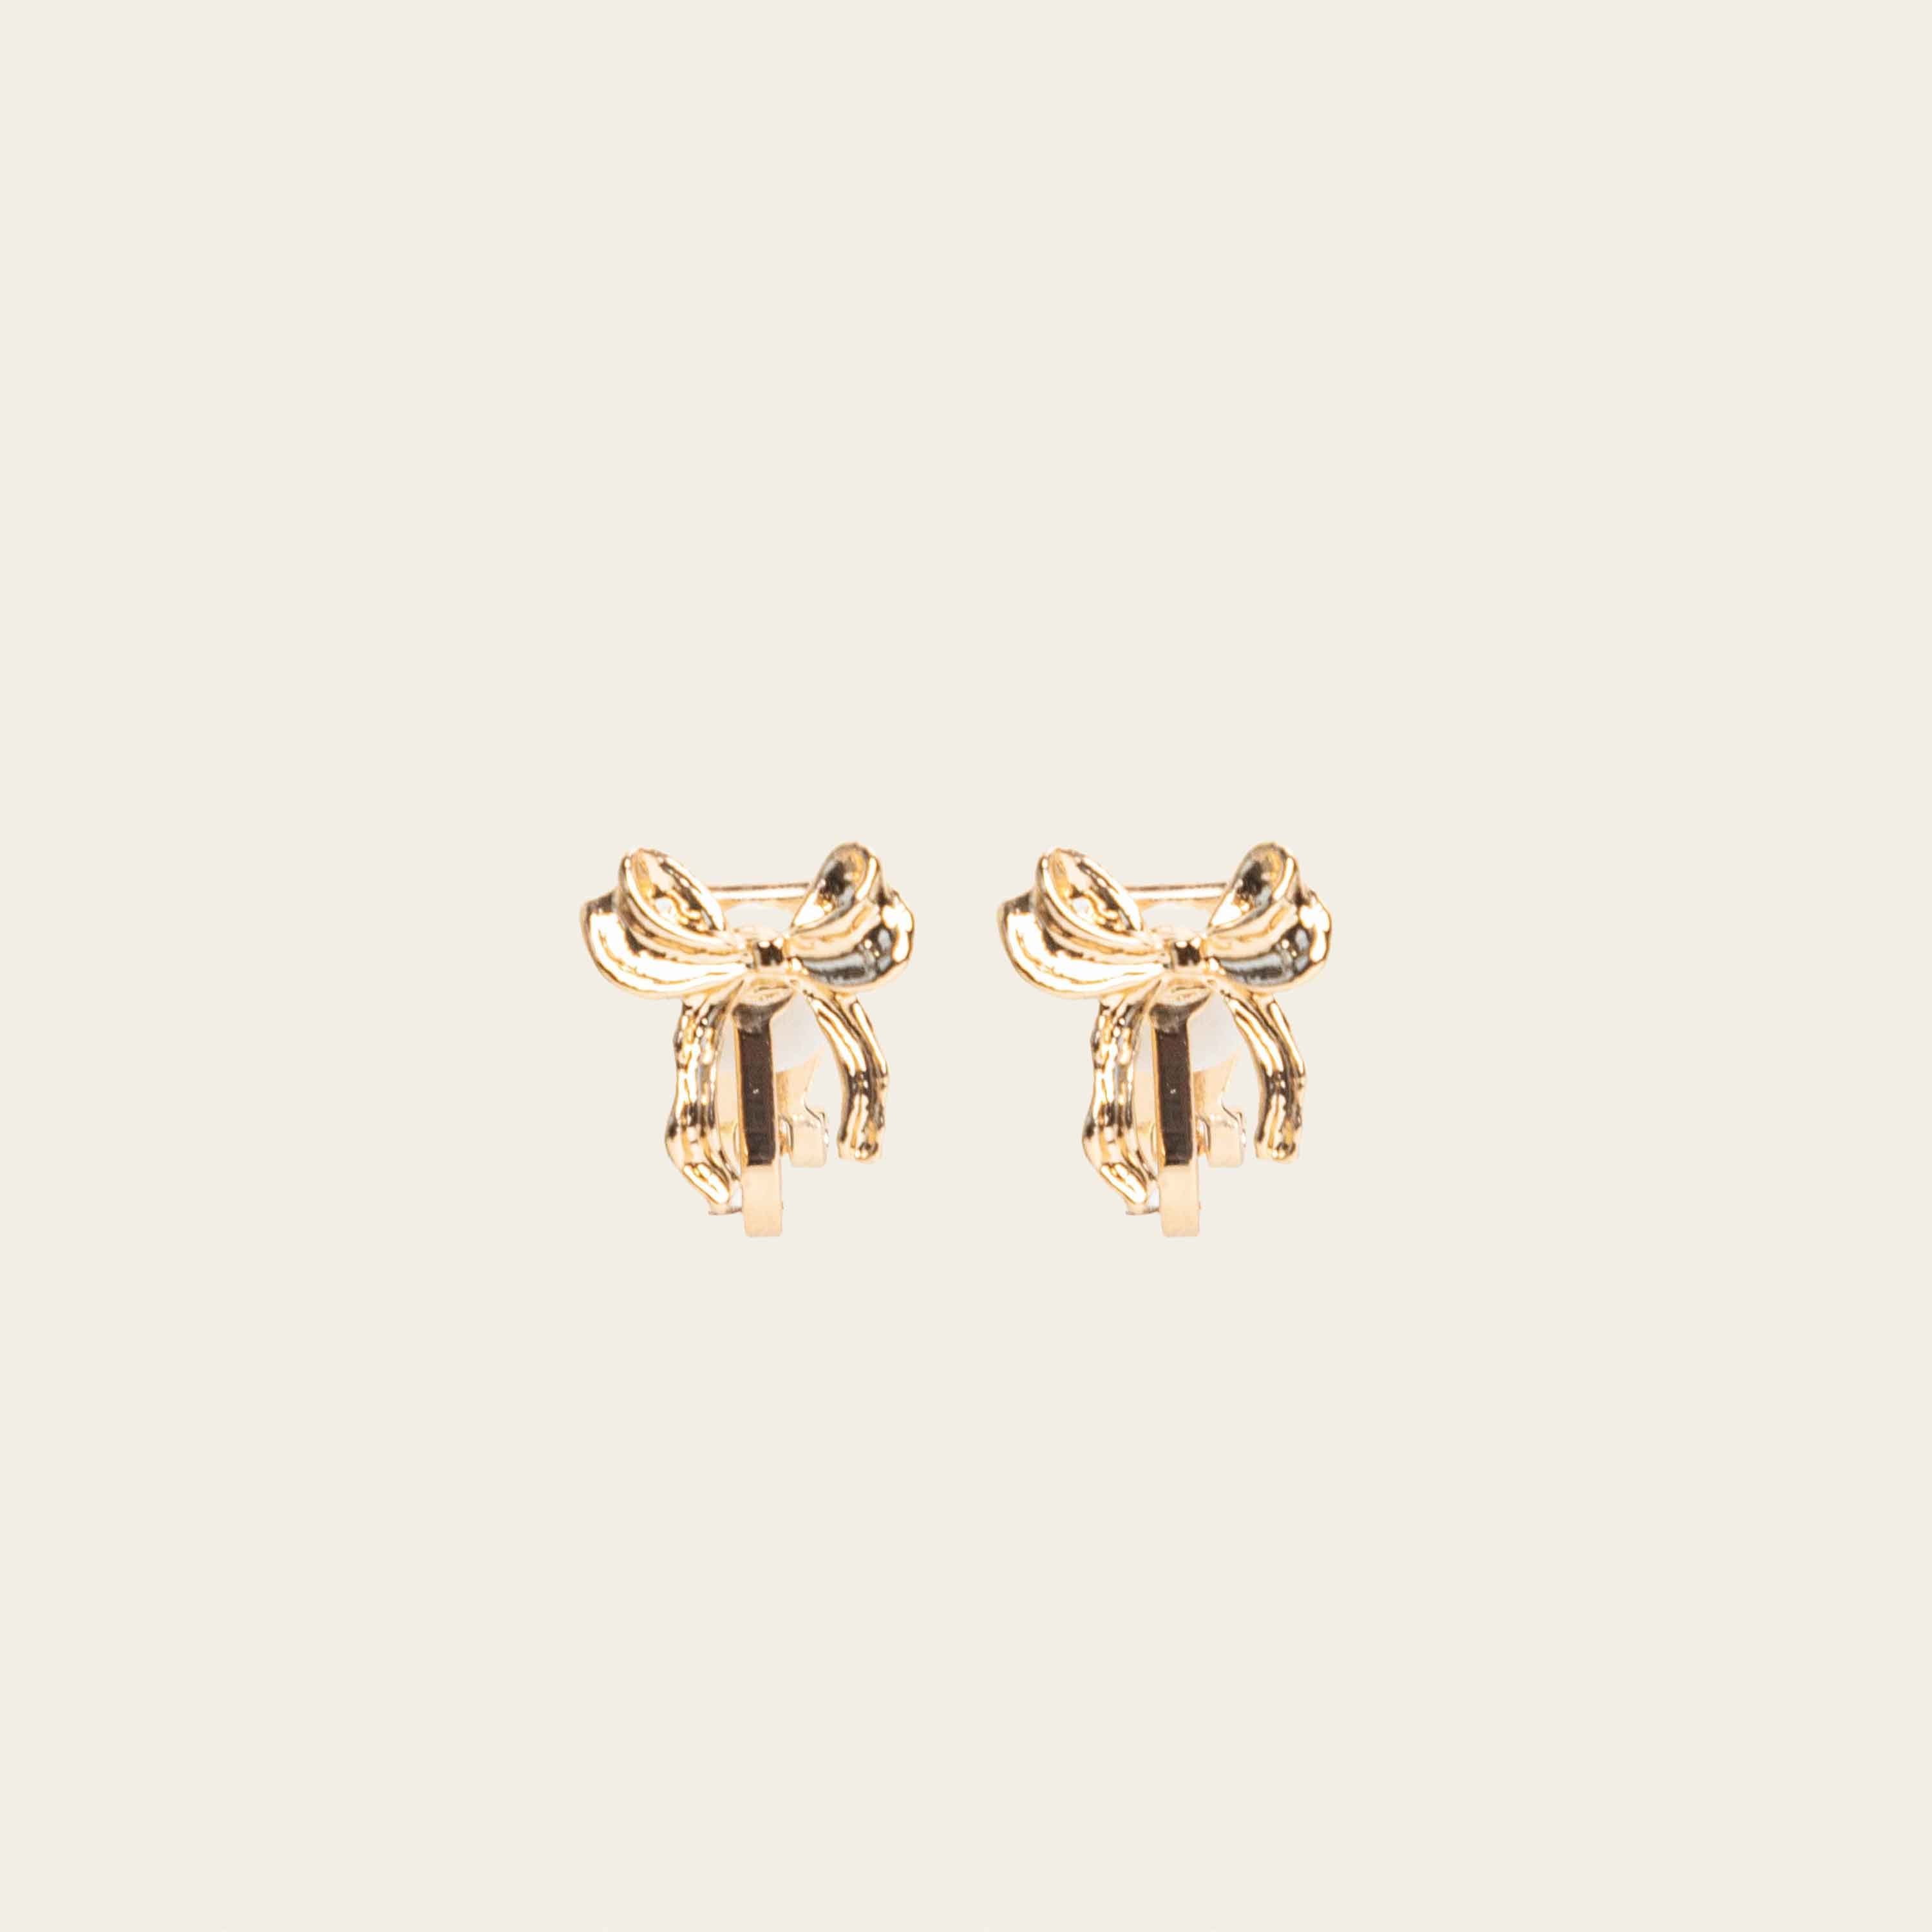 Image of the Taylor Clip On Earrings. Adjustable for sensitive or stretched ears, these earrings offer a 24-hour hold for effortless style at any occasion. Enjoy the perfect blend of elegance and ease with Taylor.